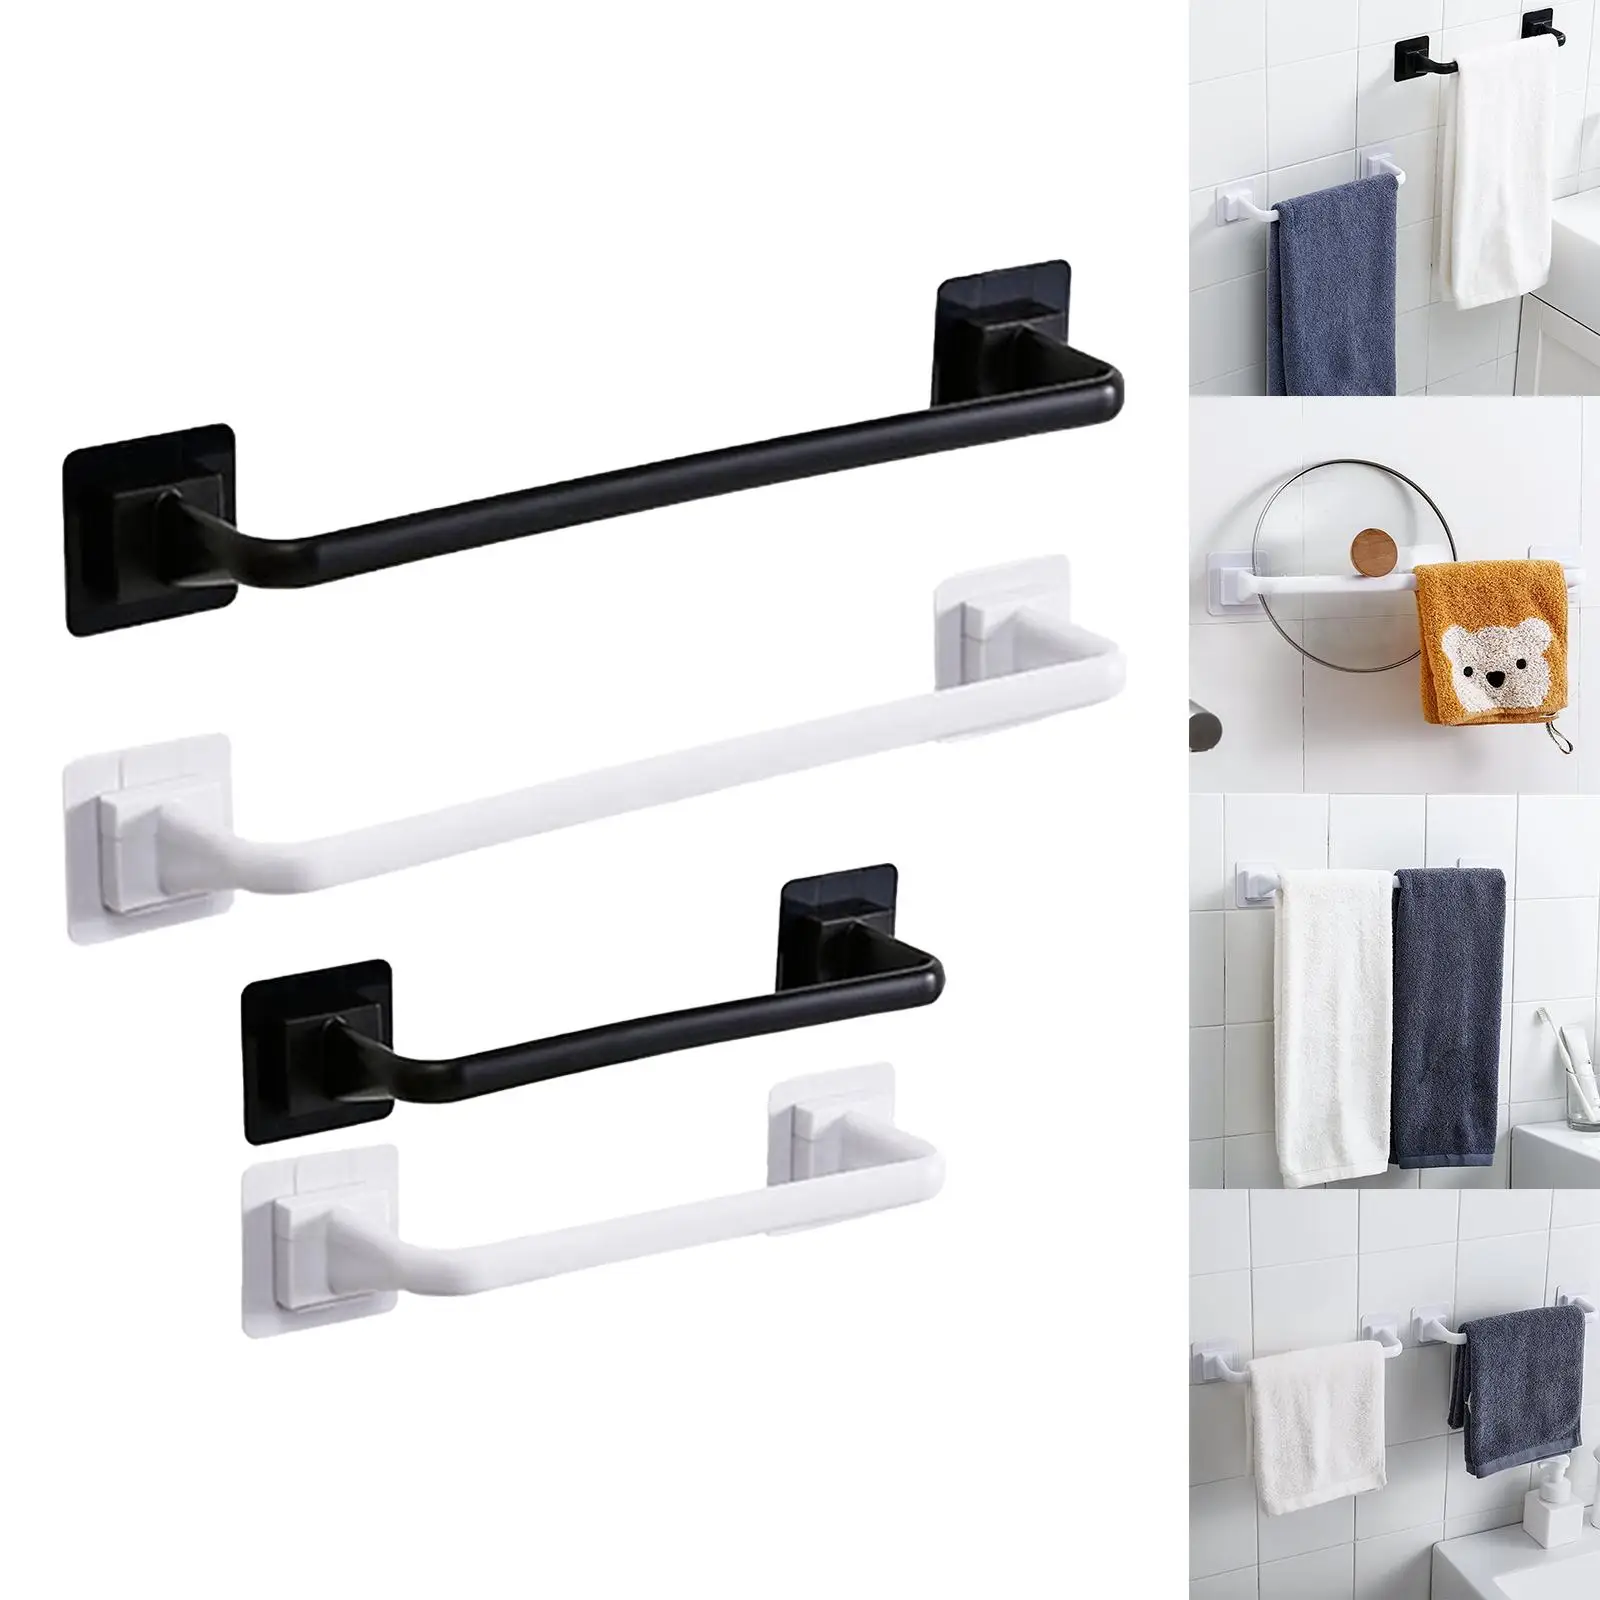 Durable Over Cabinet Towel Bar Strong Carrying Capacity Waterproof Easy to Clean Shelf Towel Hanger Wall Mounted for Kitchen